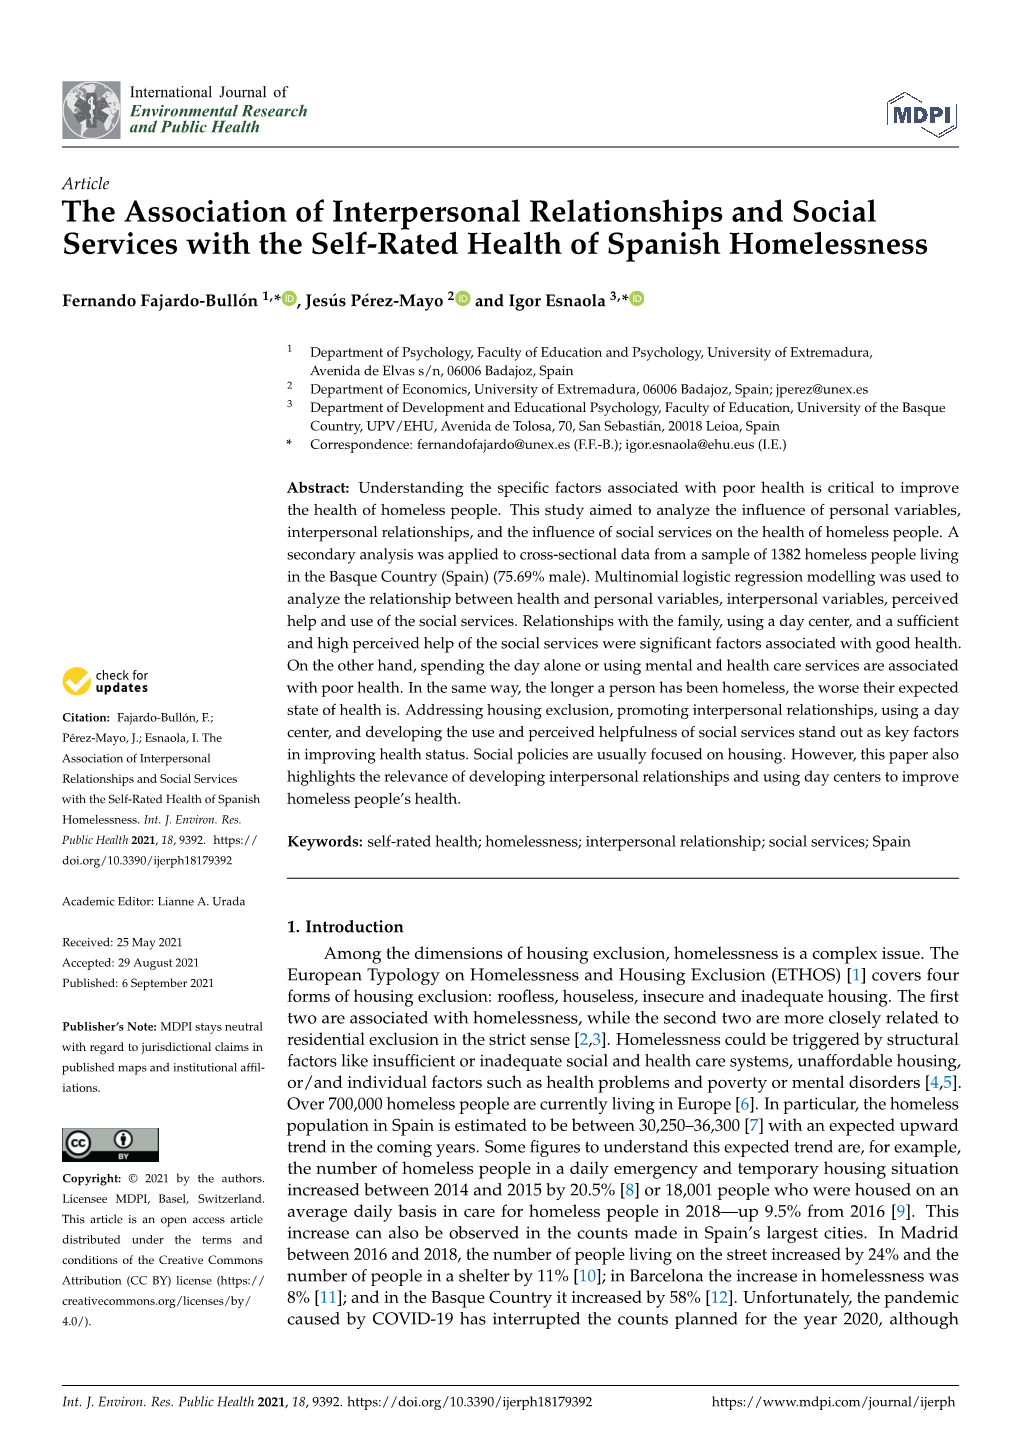 The Association of Interpersonal Relationships and Social Services with the Self-Rated Health of Spanish Homelessness